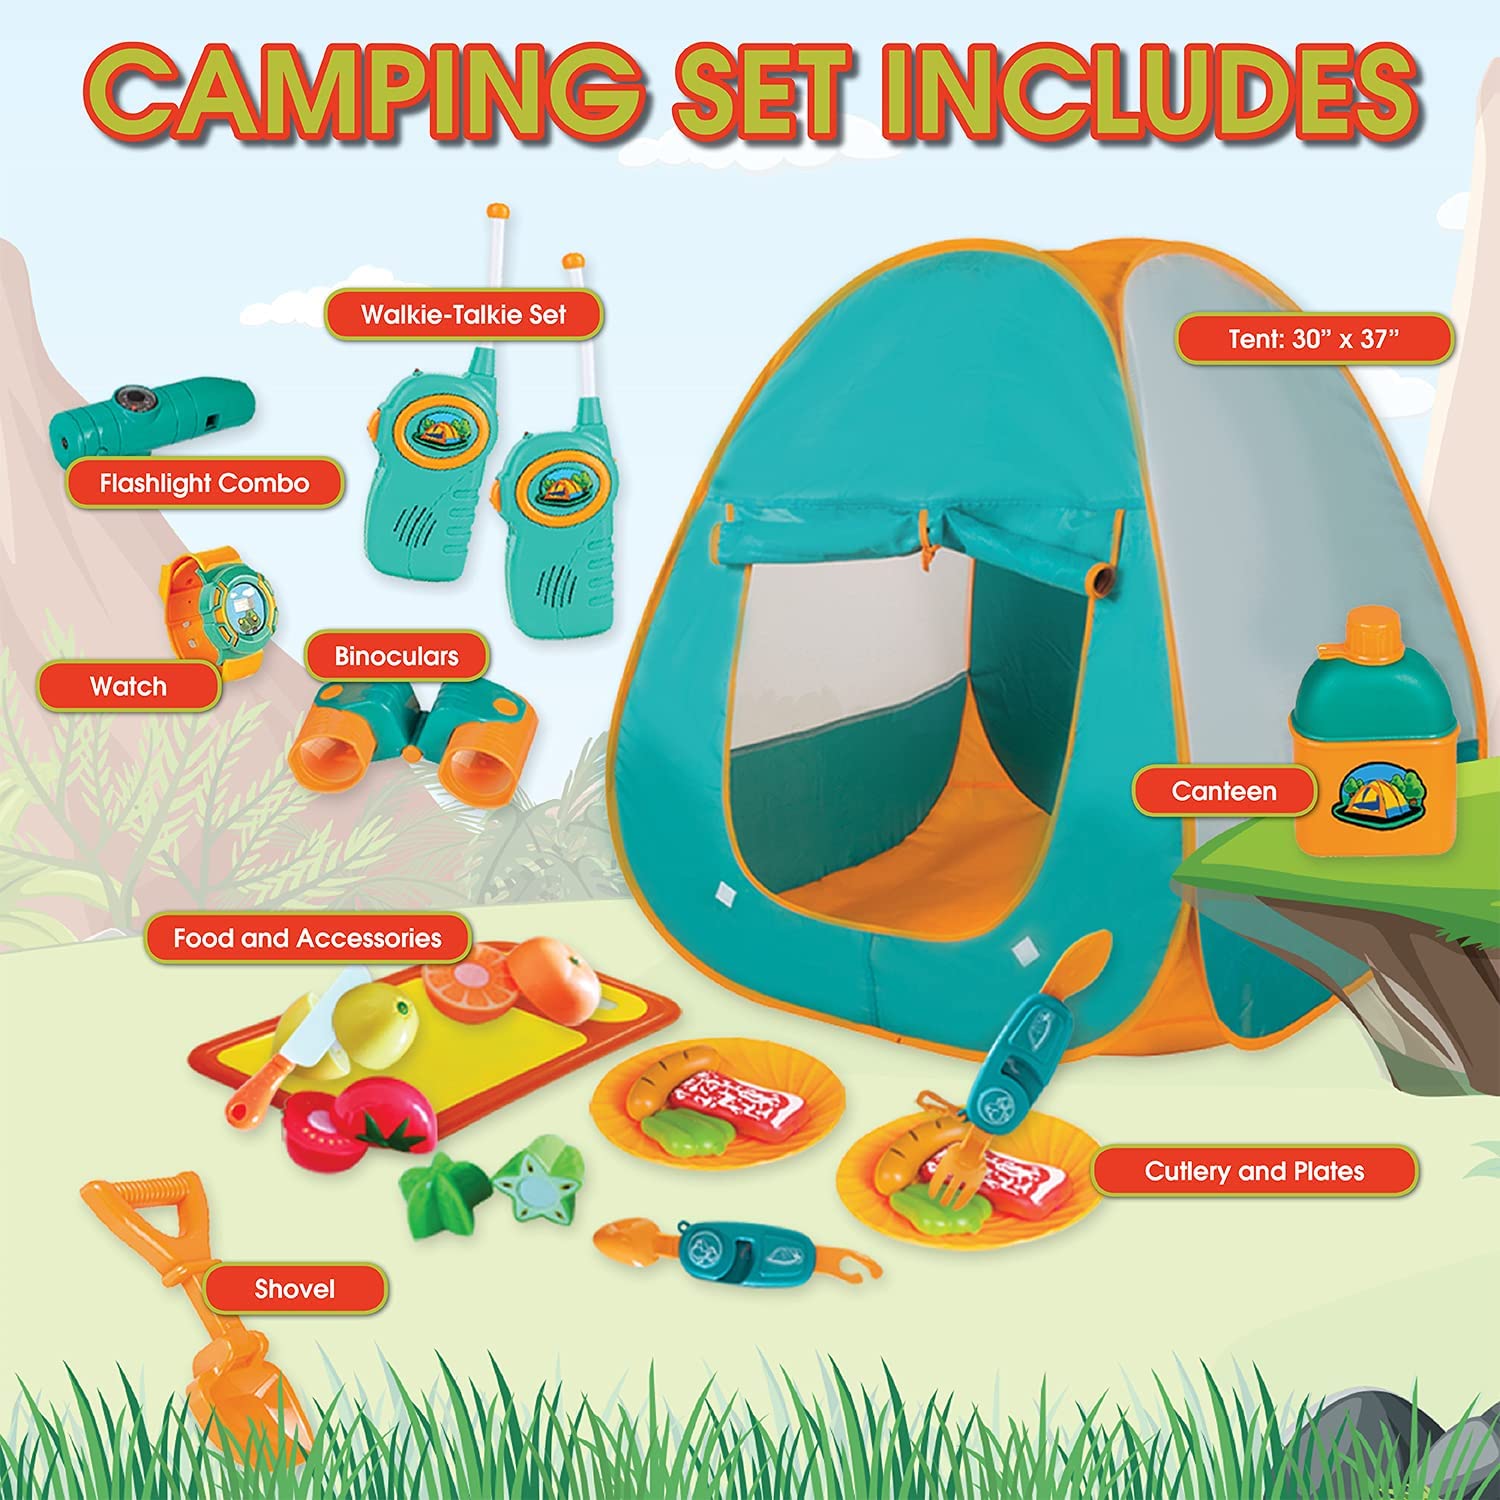 ToyVelt Kids Camping Tent Set -Includes Tent, Telescope, 2 Walkie Talkies, and Full Camping Gear Set Indoor and Outdoor Toy - Best Present for 3 4 5 6 Year Old Boys and Girls and Up. Updated Version